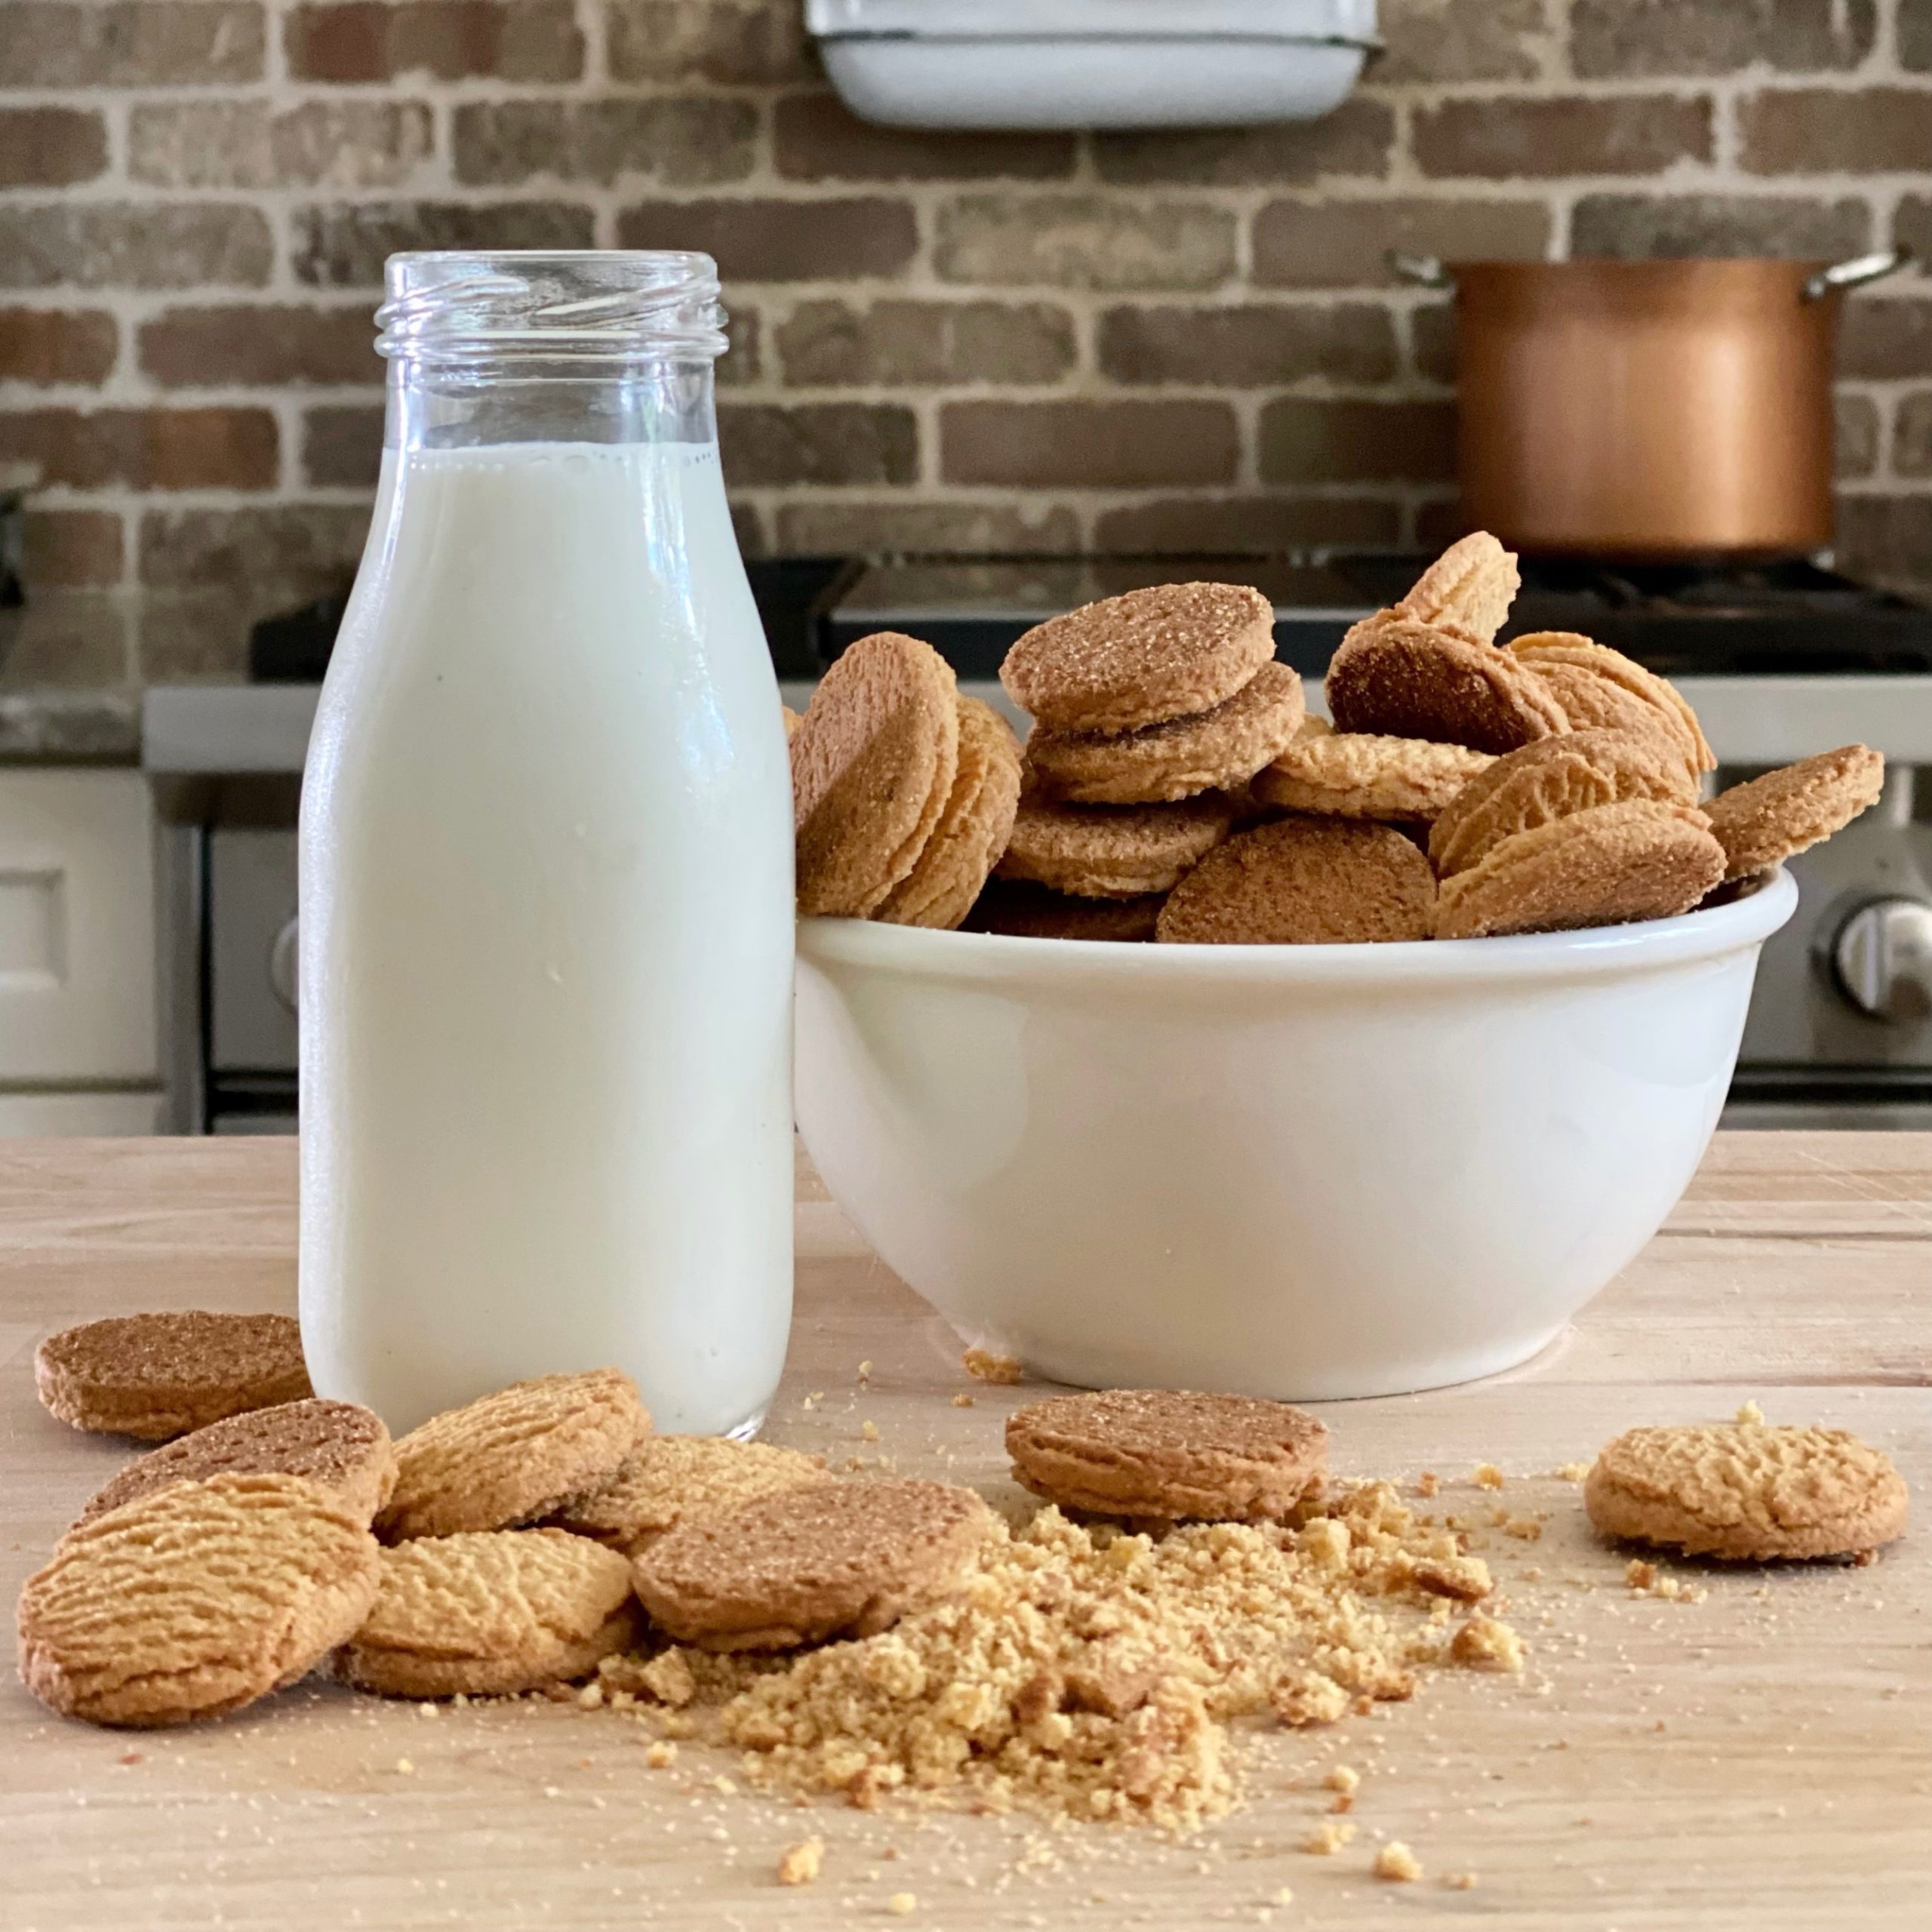 Gingersnap cookies in a white bowl with a glass jug of milk. In front of them are more gingersnap cookies, whole and crushed.